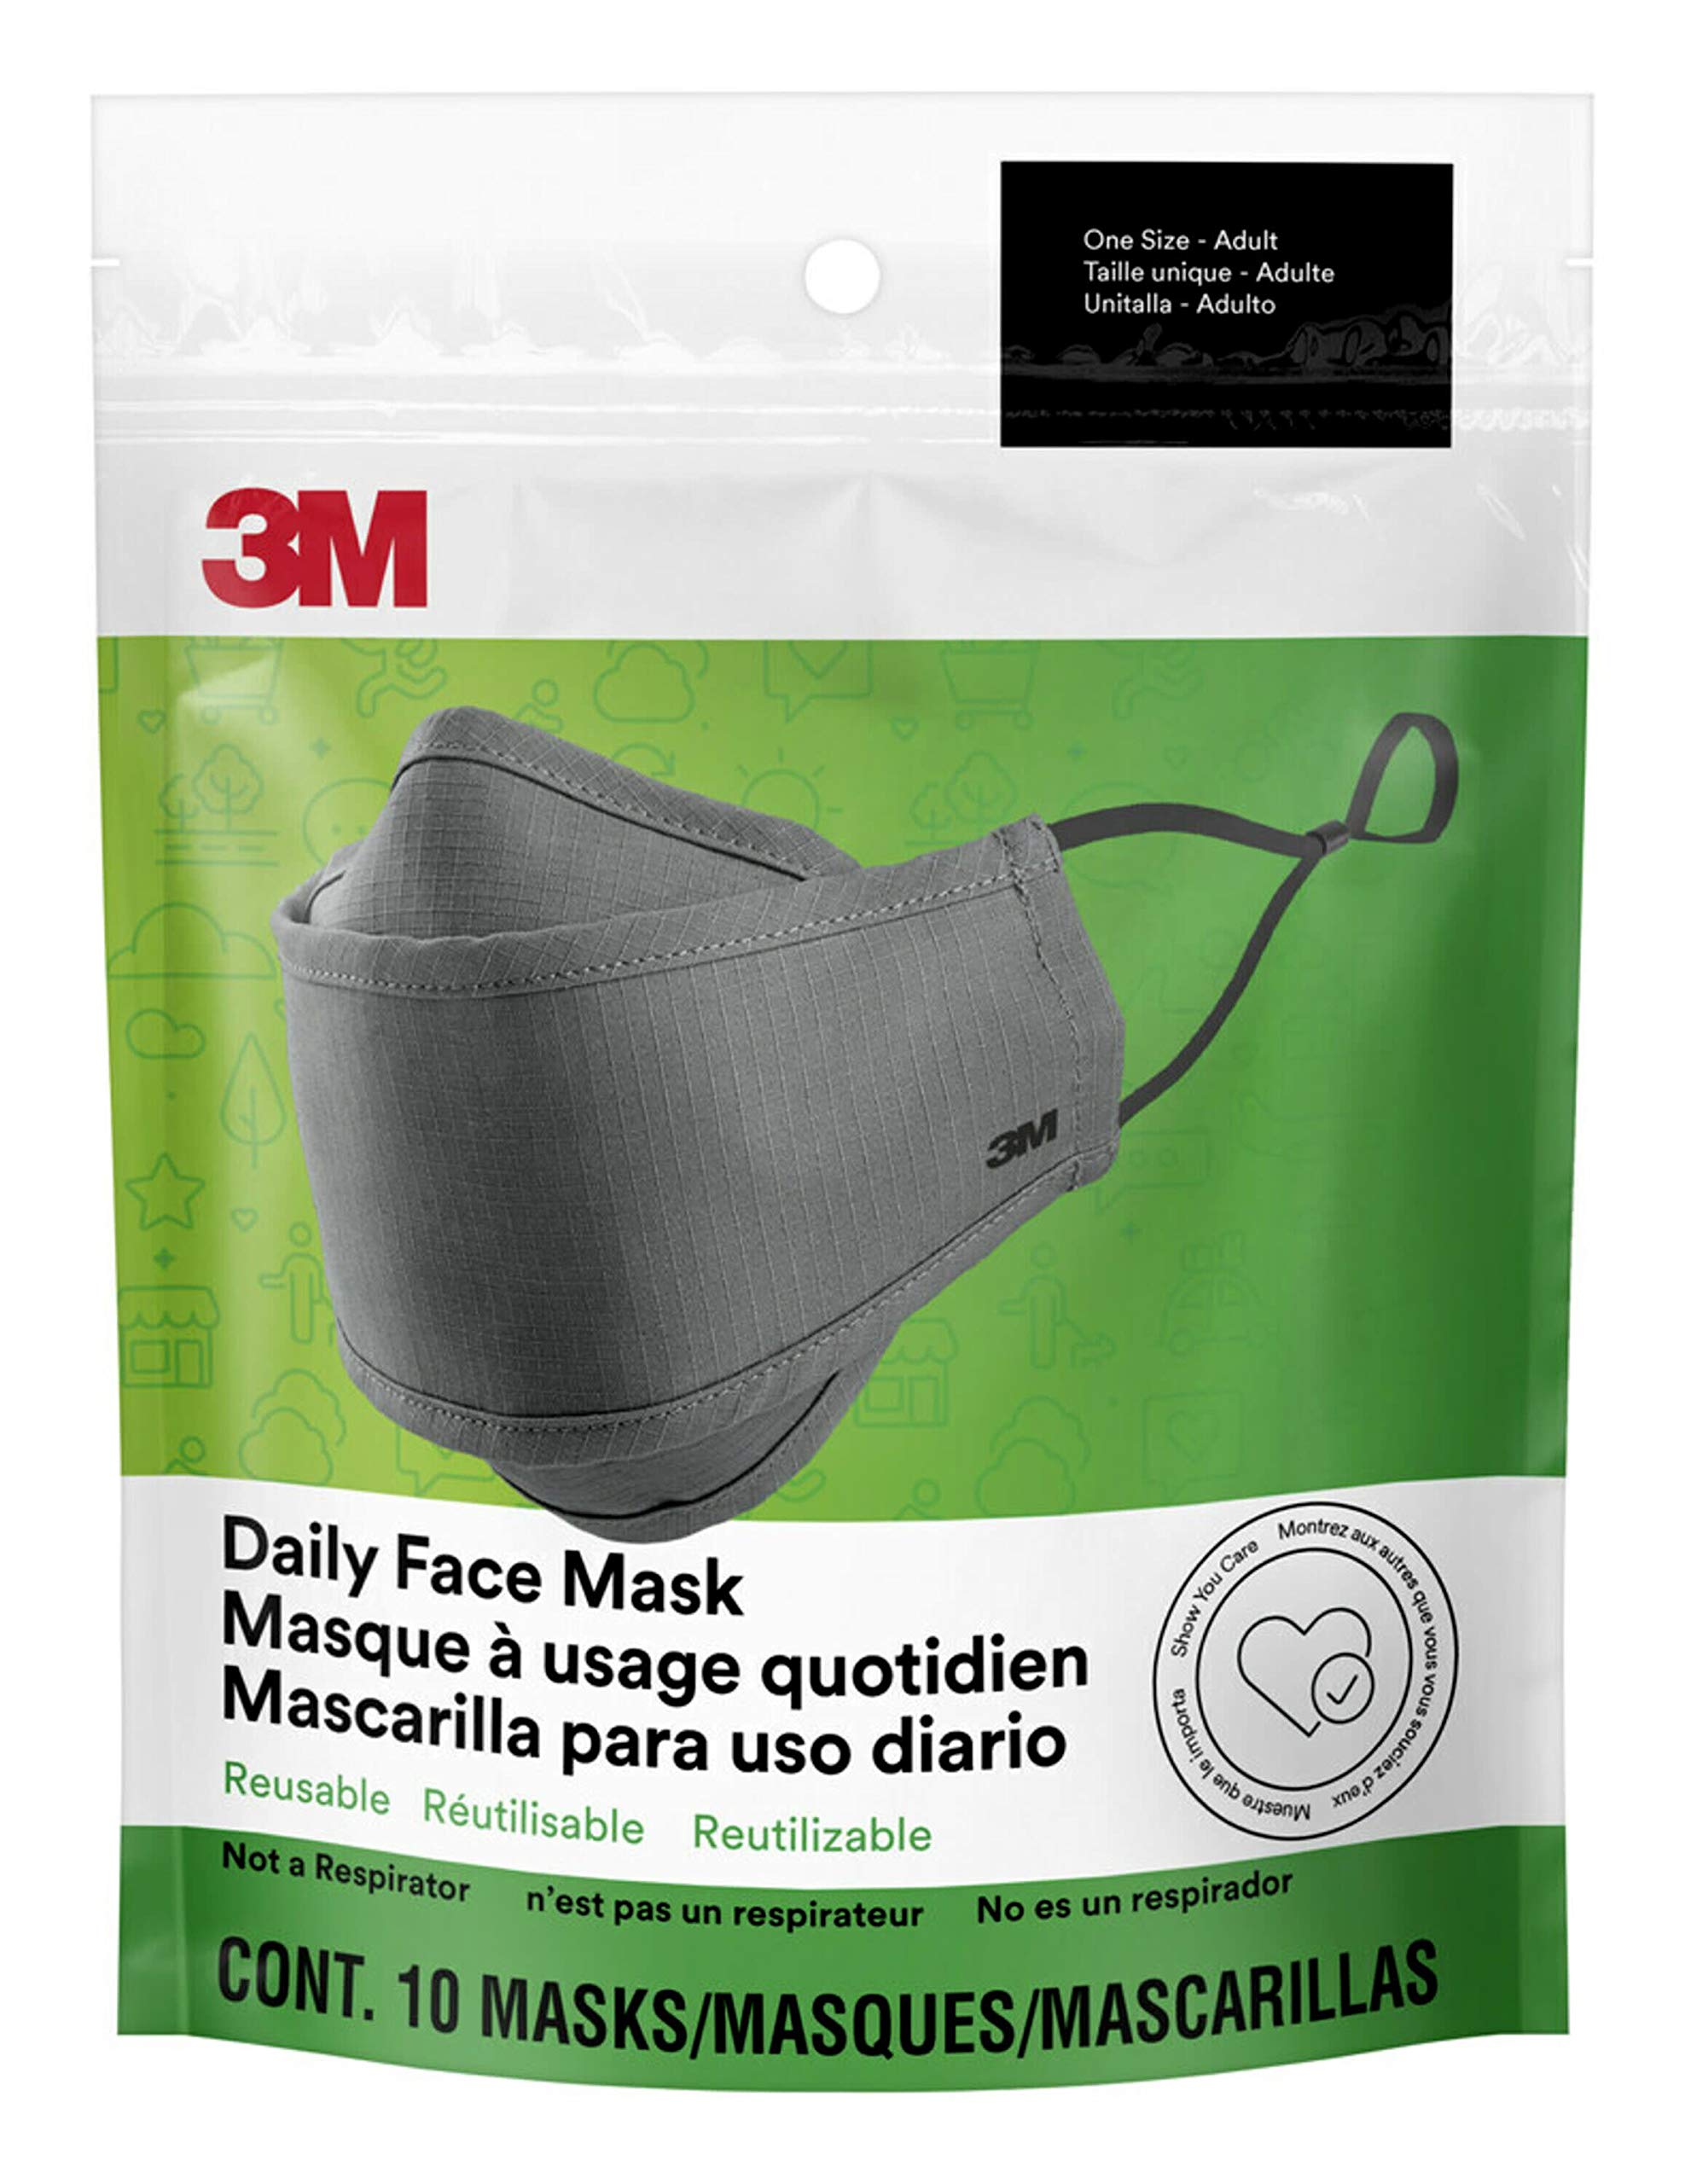 3M Daily Face Mask, Reusable, Washable, Adjustable Ear Loops, Lightweight Cotton Fabric, 10 Pack, Gray